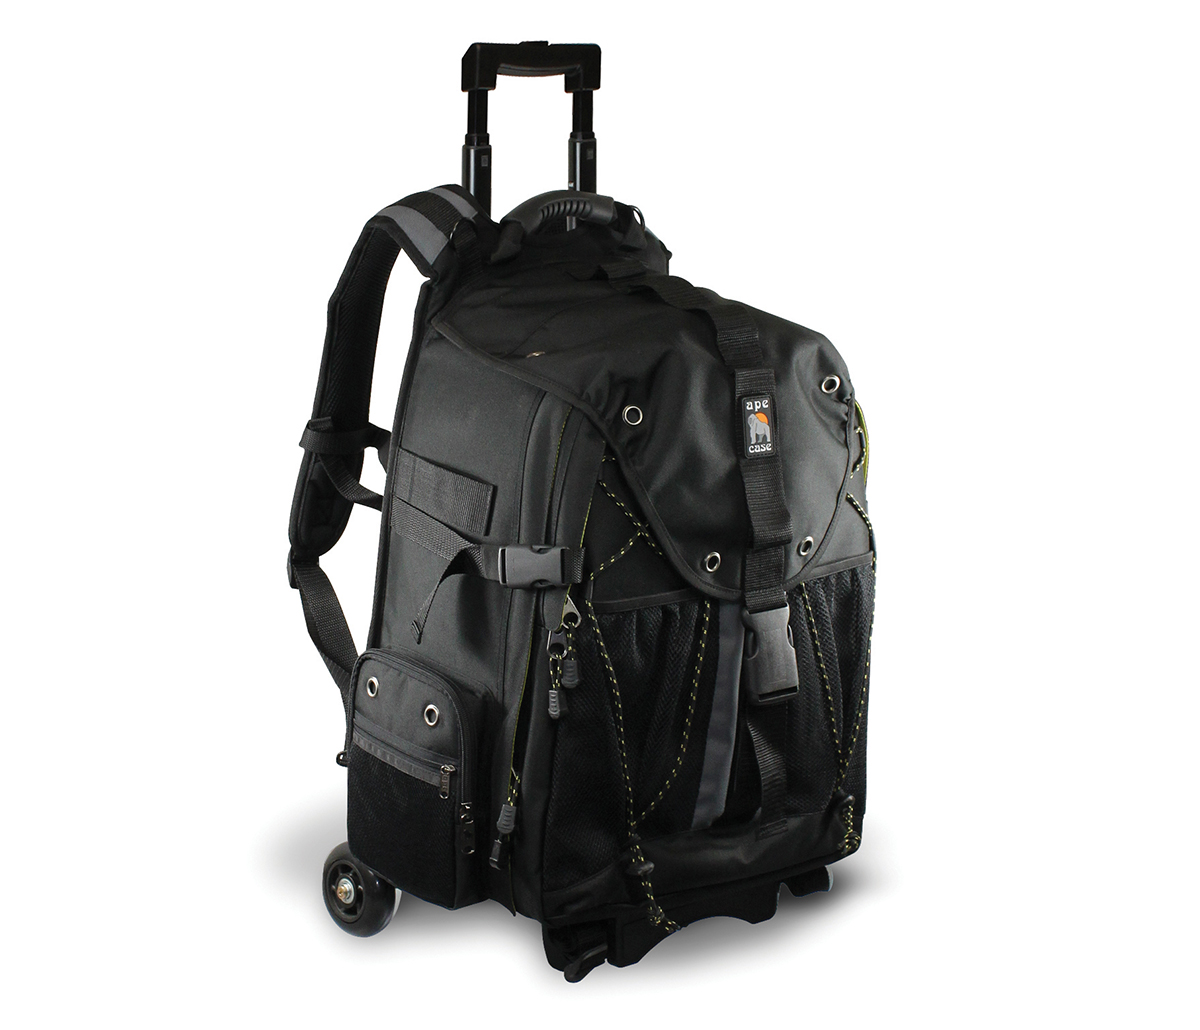 ACPRO3500 - Ape Case offers a large capacity backpack without the